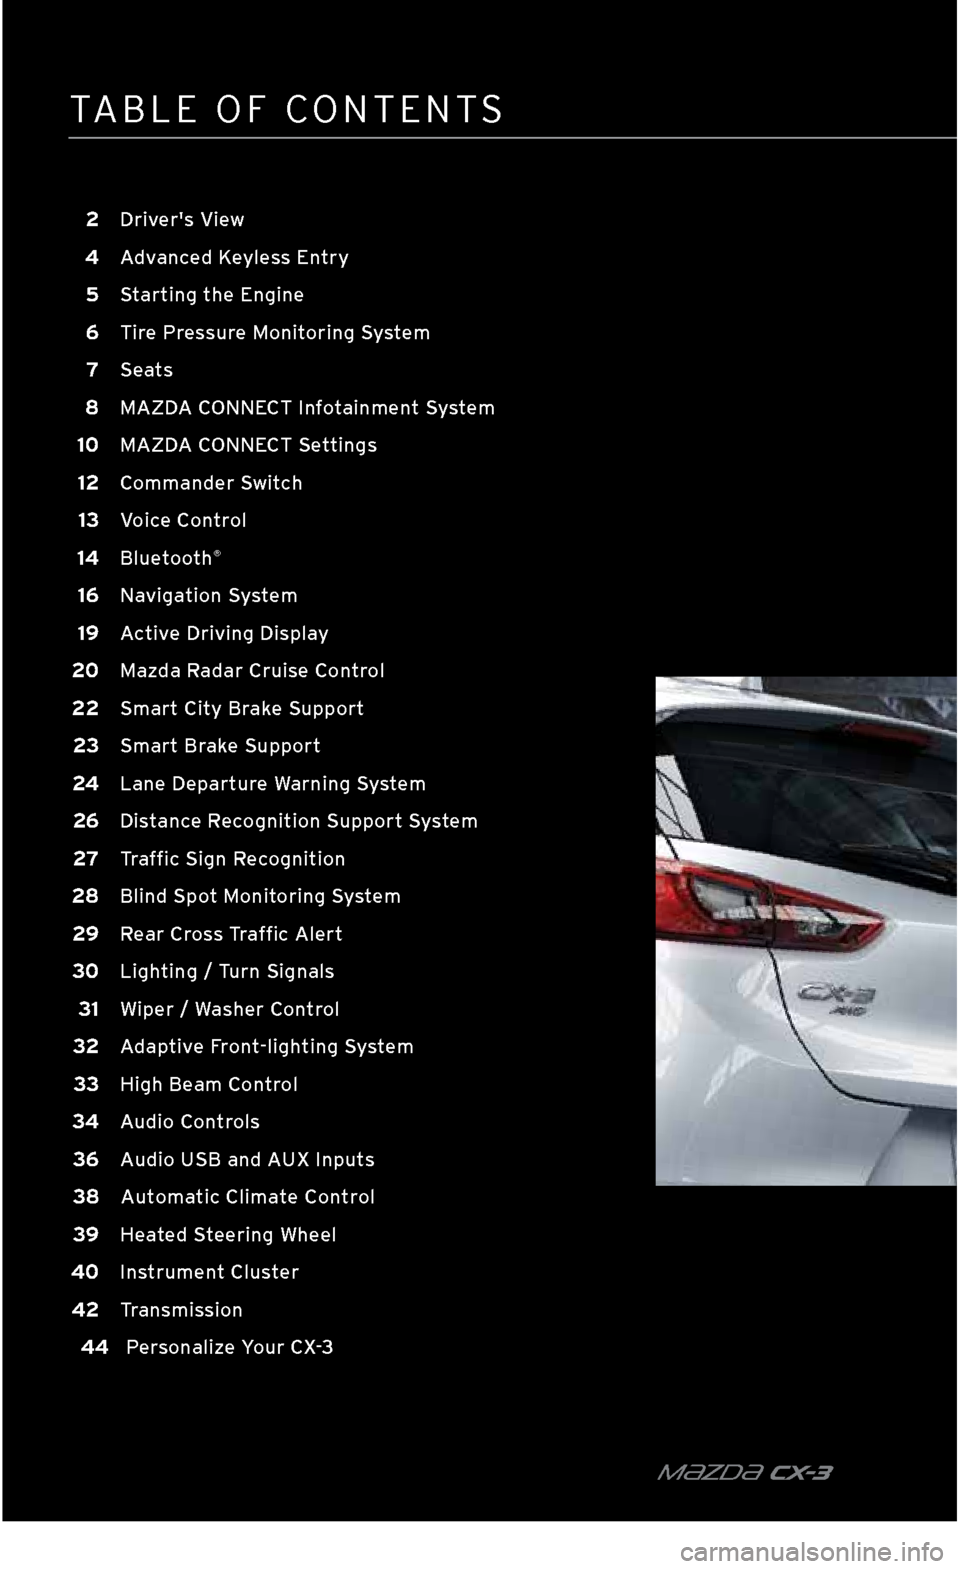 MAZDA MODEL CX-3 2018  Smart Start Guide (in English) TABLE OF \bONTENT\f
m{zd{ C X-3
 2 Drivers View
 
4
 A
 dvanced Keyless Entry
 

5
 S
 tarting the Engine
 

6
 T
 ire Pressure Monitoring System
 

7
 S
 eats
 

8
 MAZD
 A CONNECT Infotainment Syst